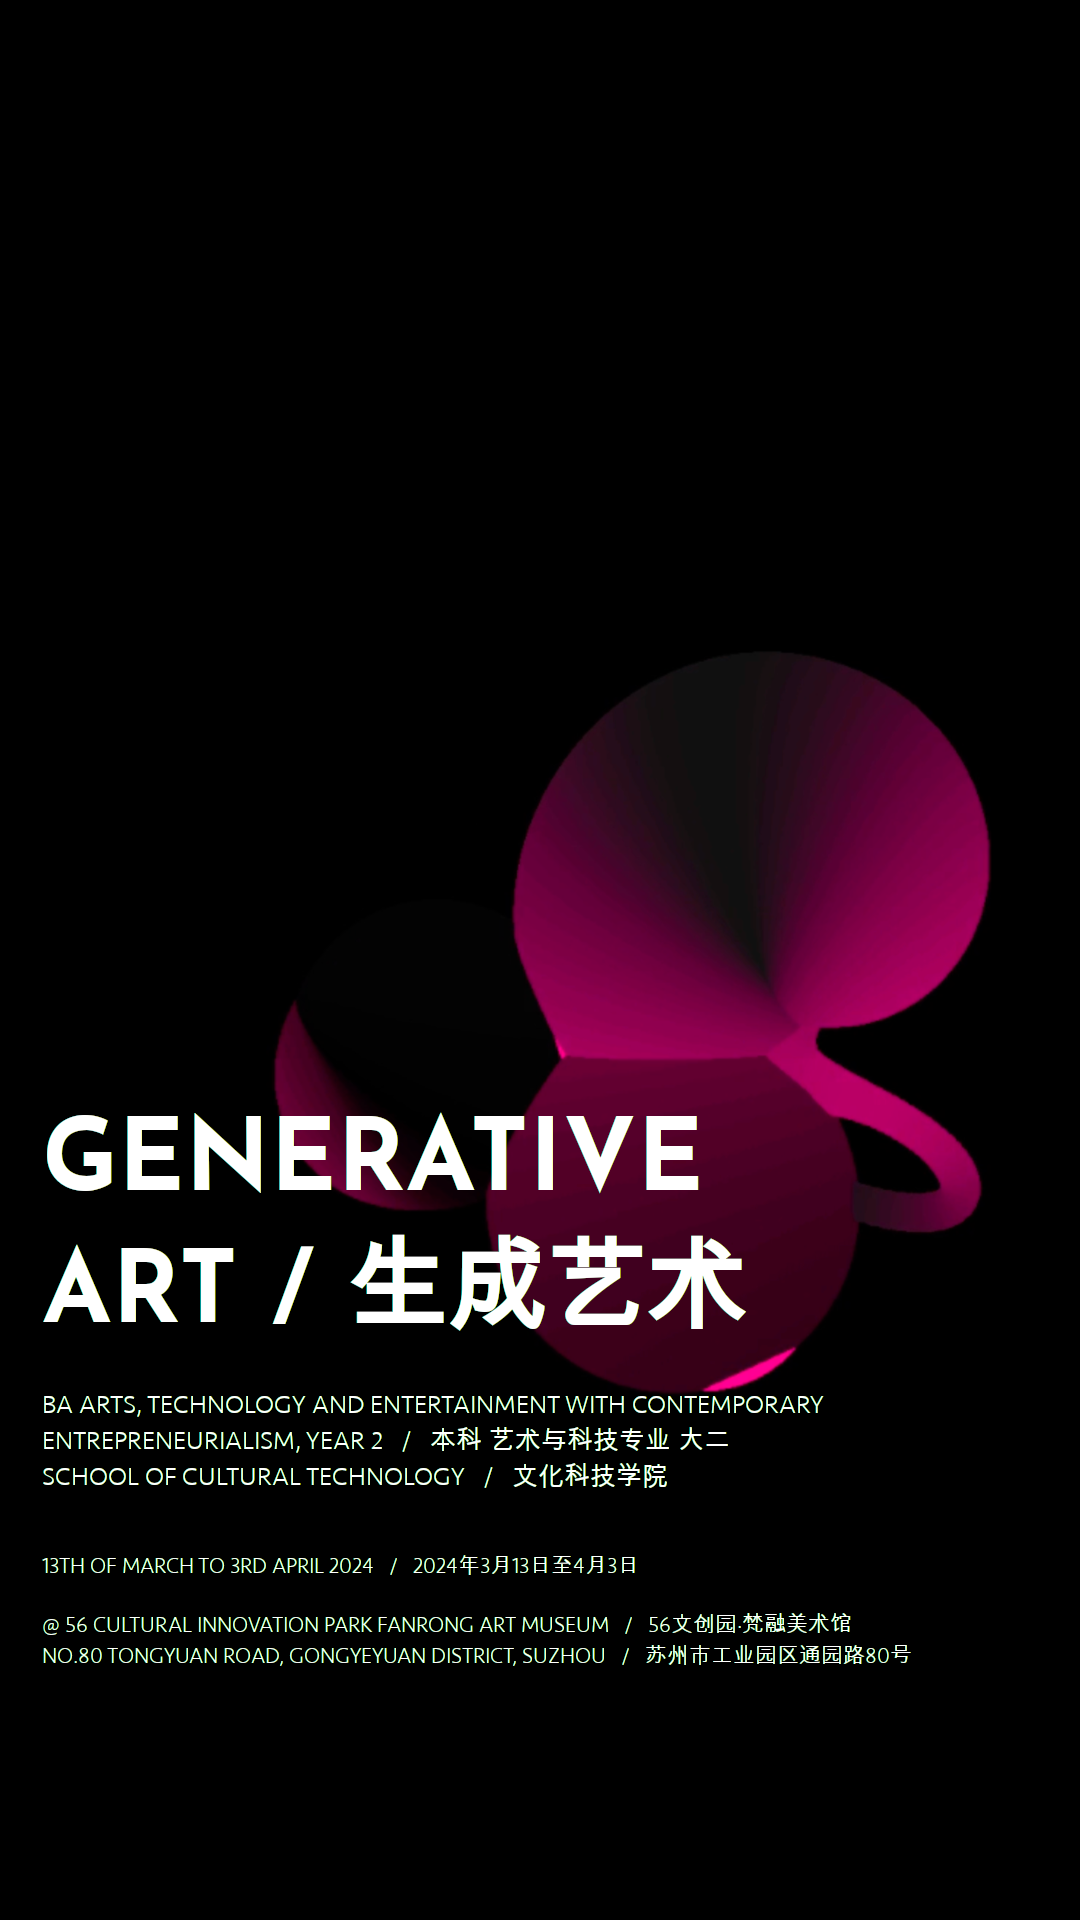 【Event Review】The School of Cultural Technology Student Exhibition: Generative Art